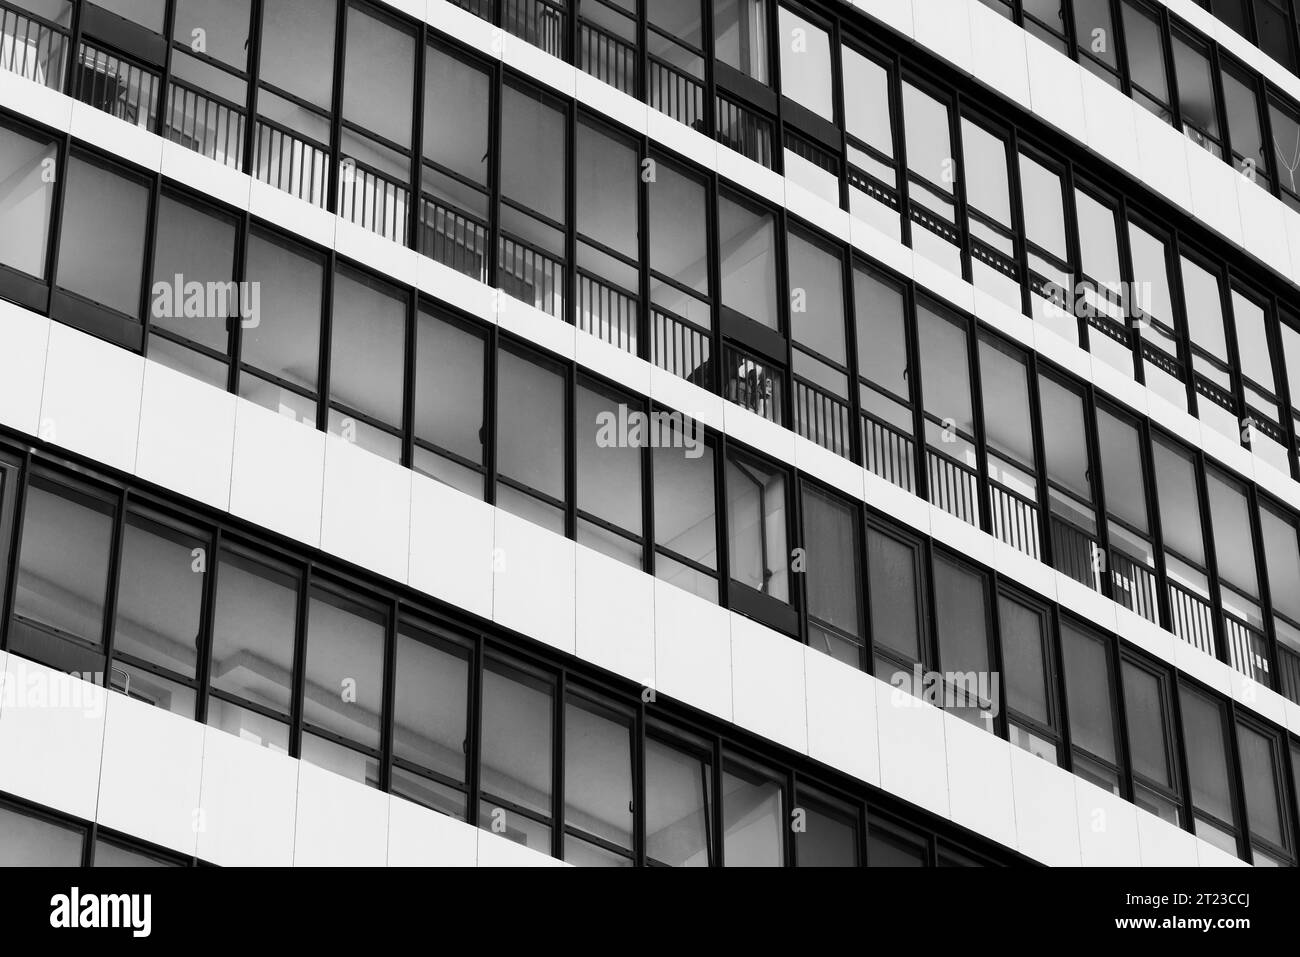 Abstract modern architecture background, white house wall with windows in rows. Black and white photo Stock Photo